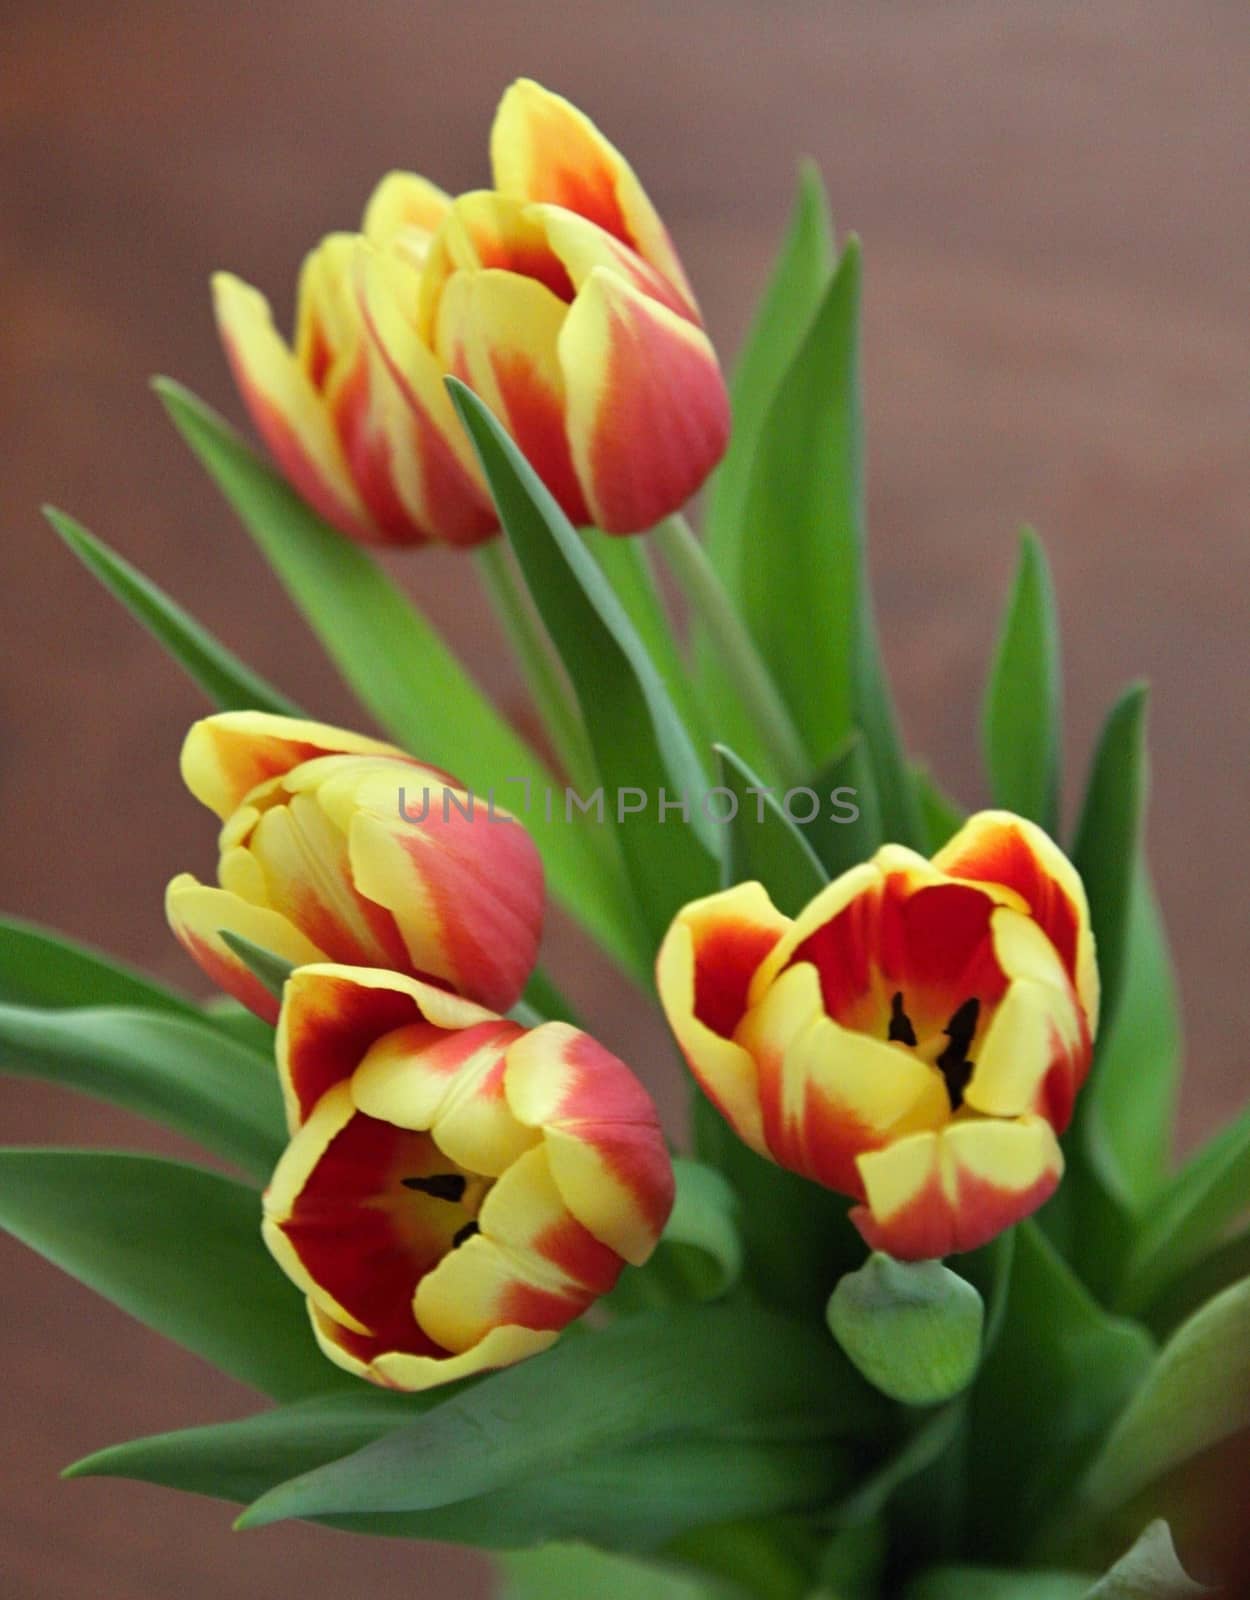 Bouquet of yellow and orange tulips  by jnerad